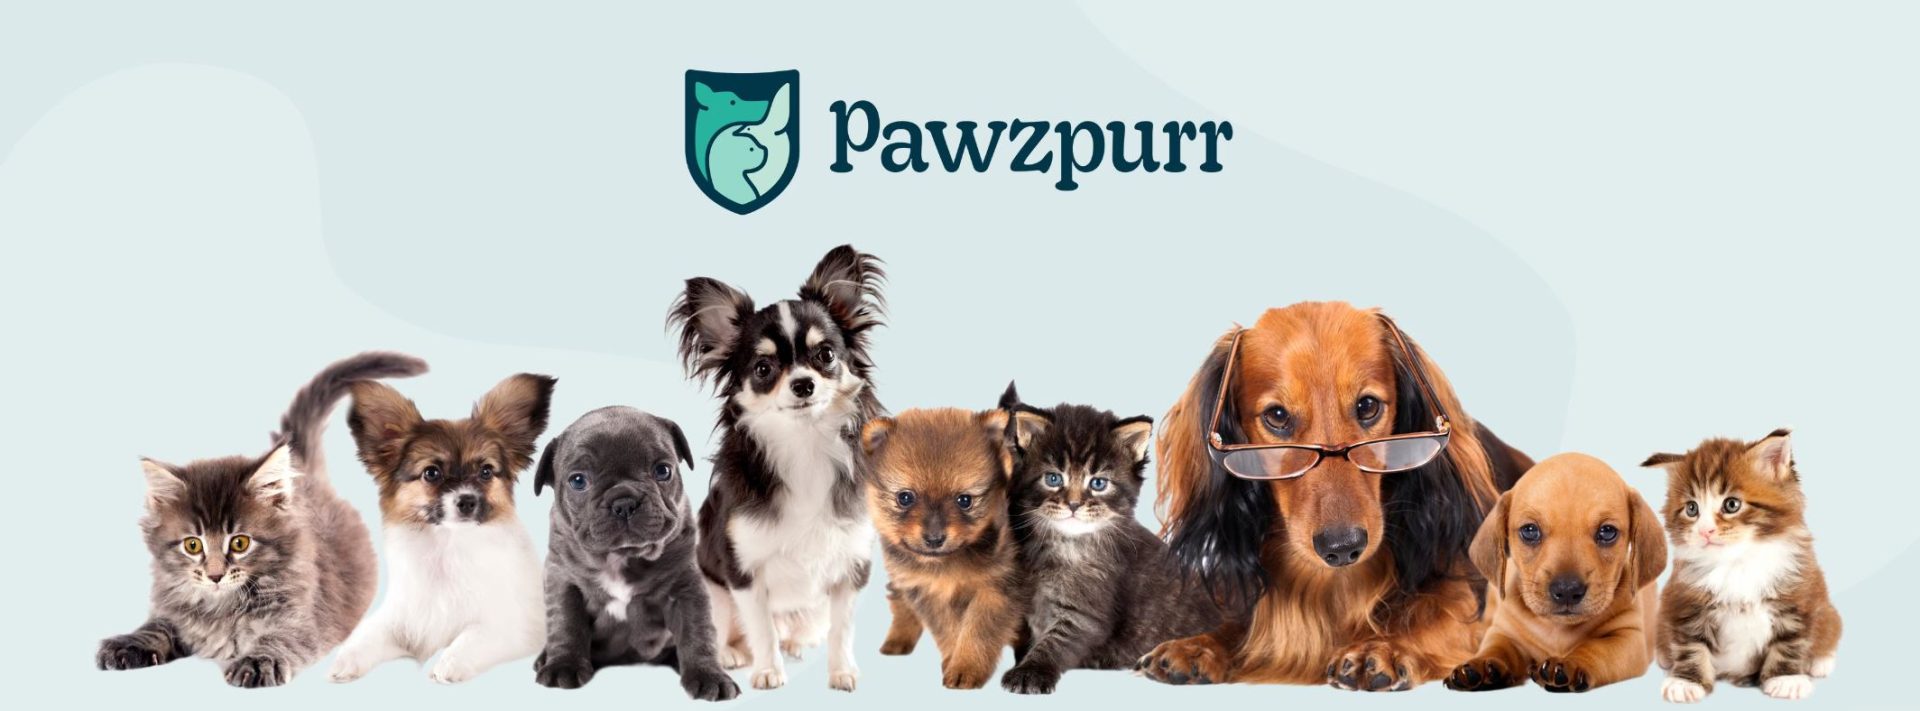 Pawzpurr launches service providing life-long care and financial security to beloved pets